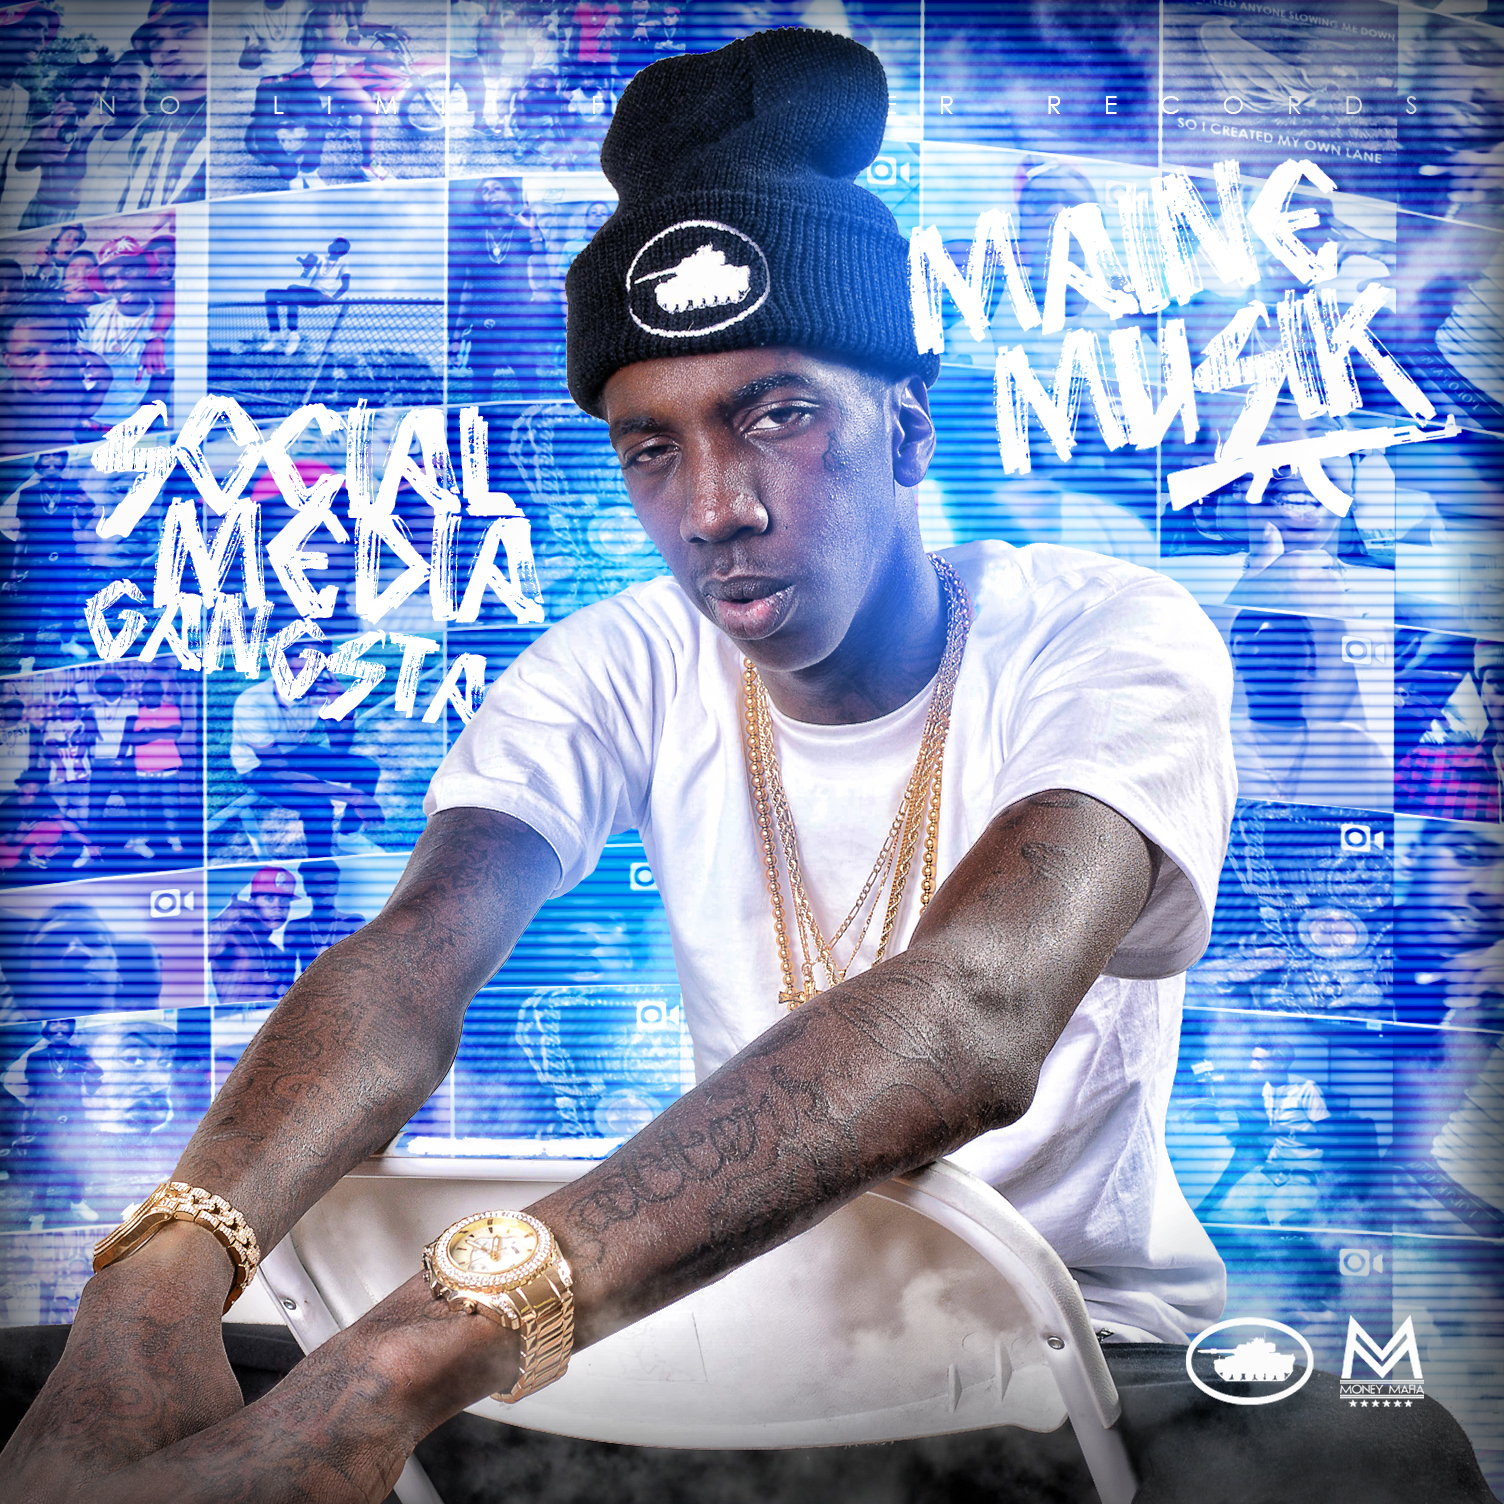 “MAINE MUSIK” from Master P street music gang Money Mafia with new